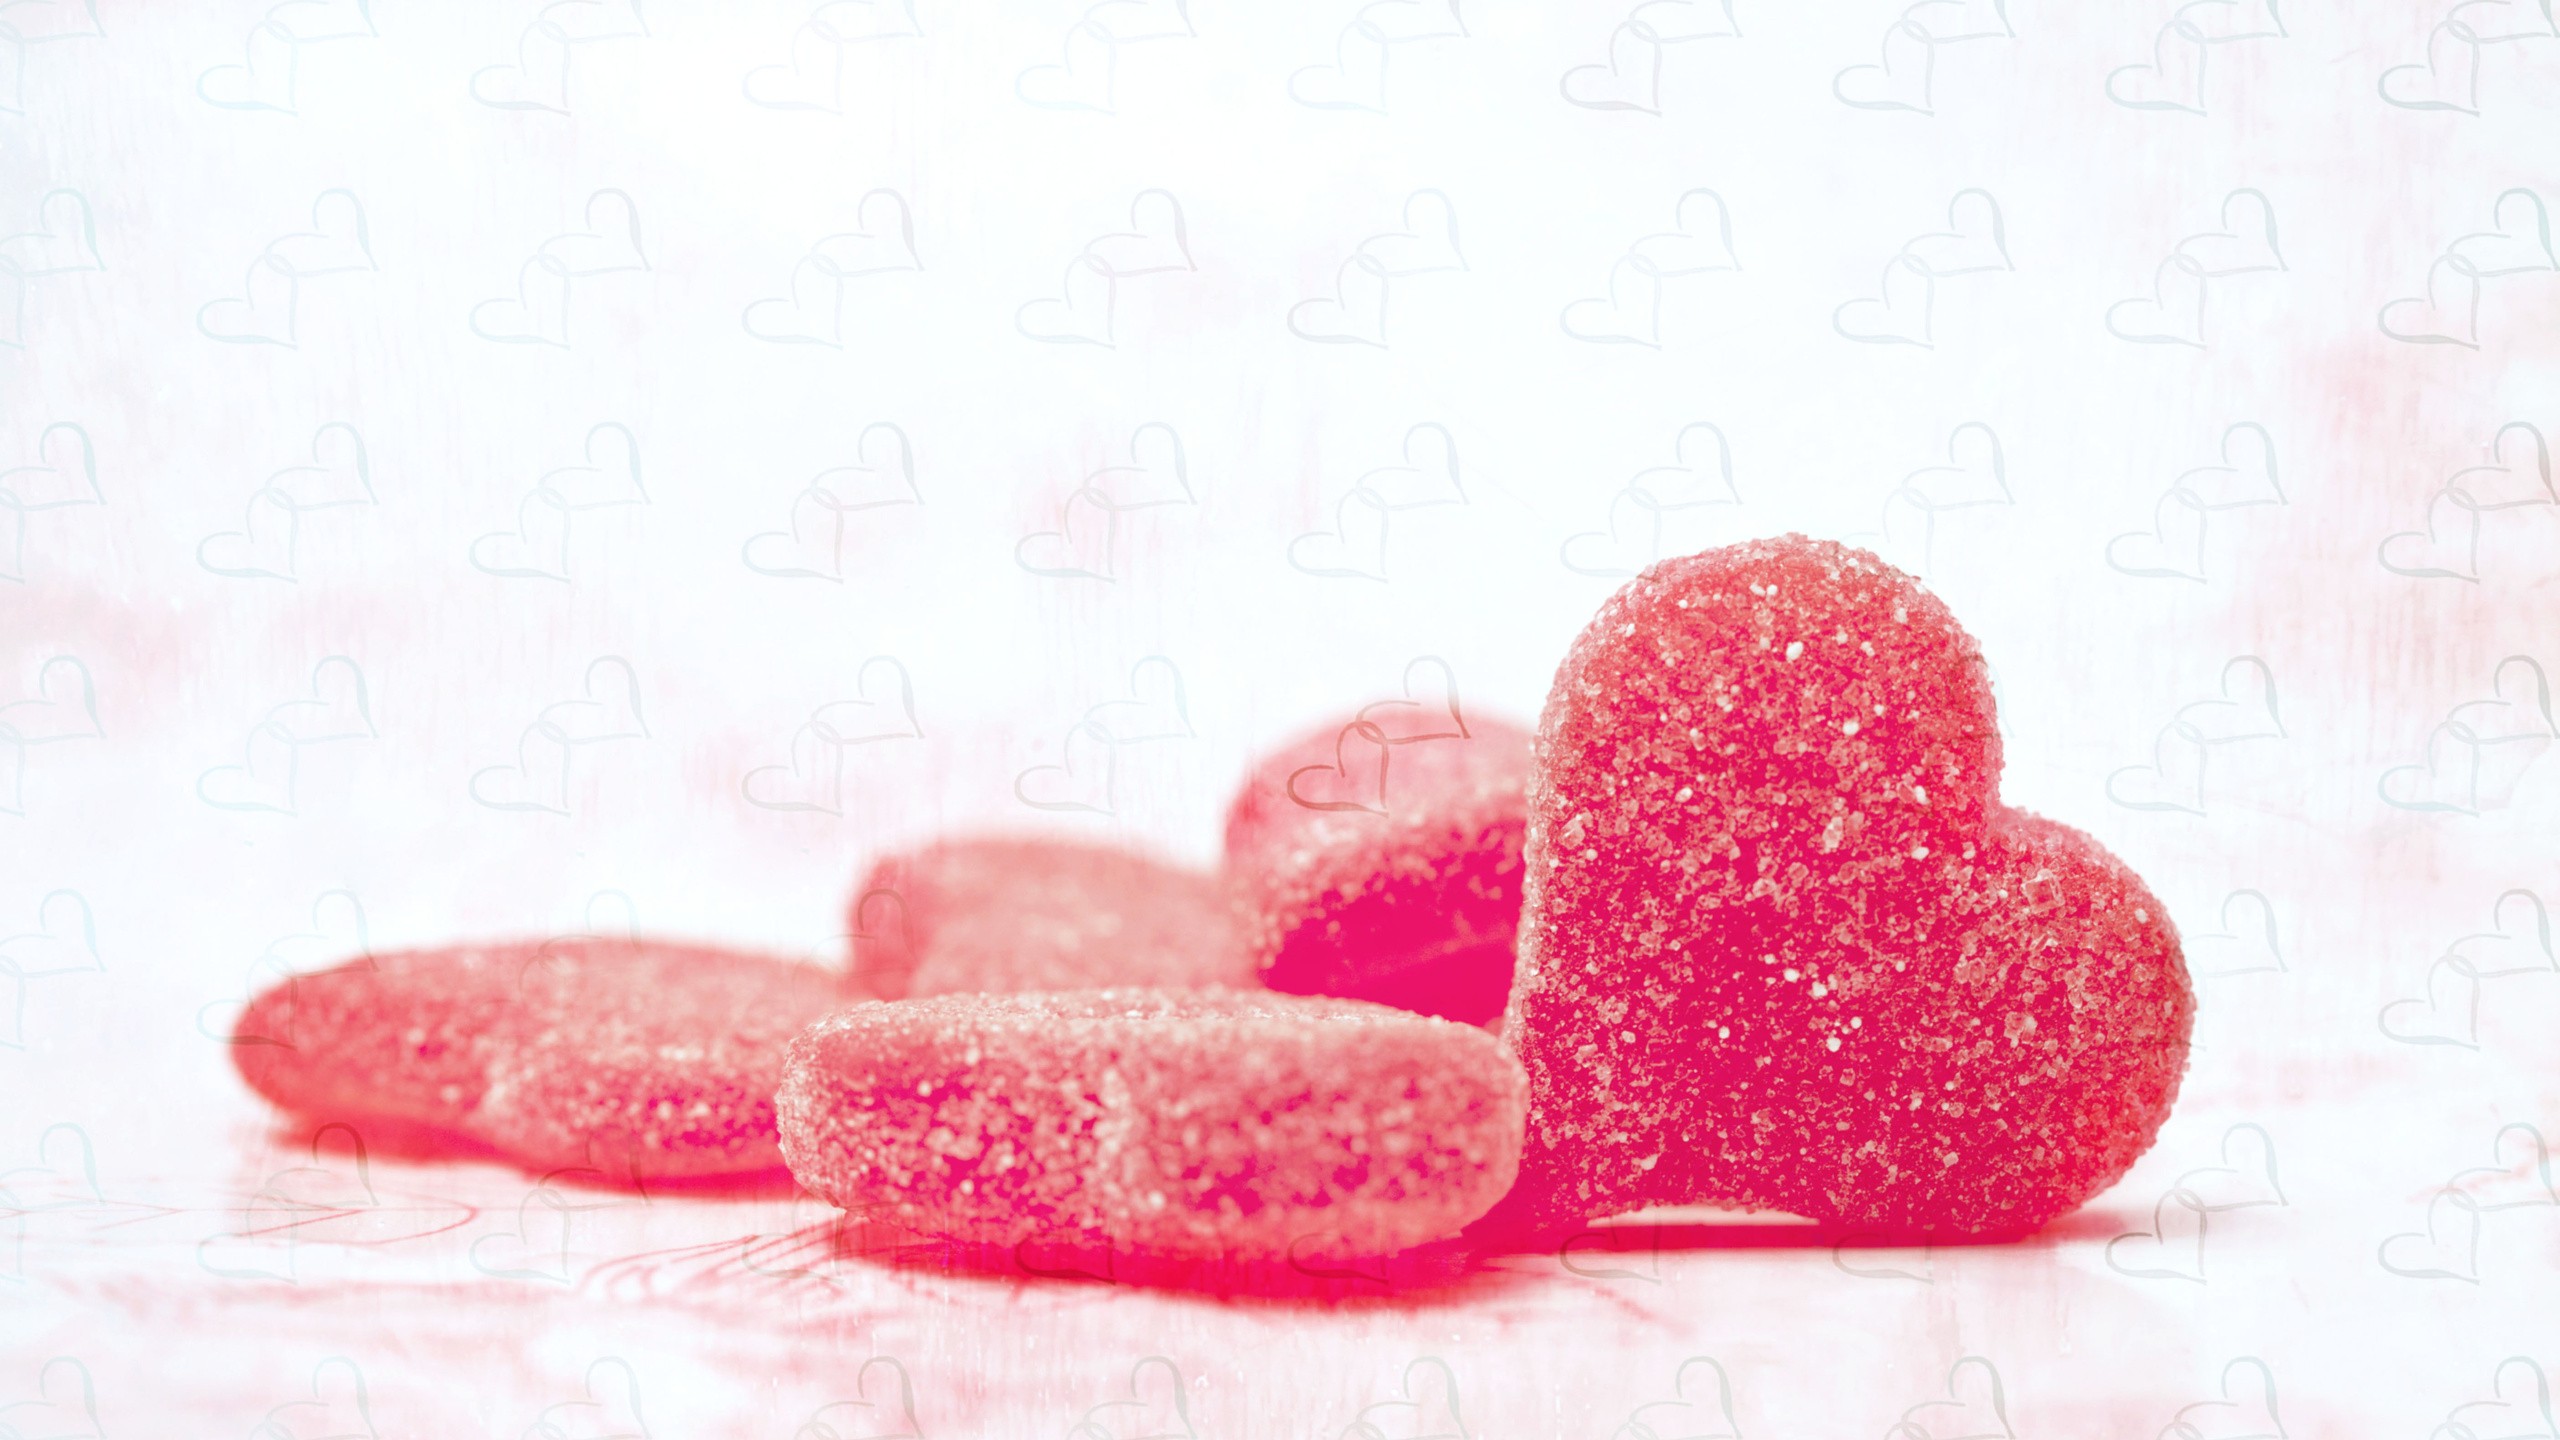 General 2560x1440 sweets food heart (design) white background